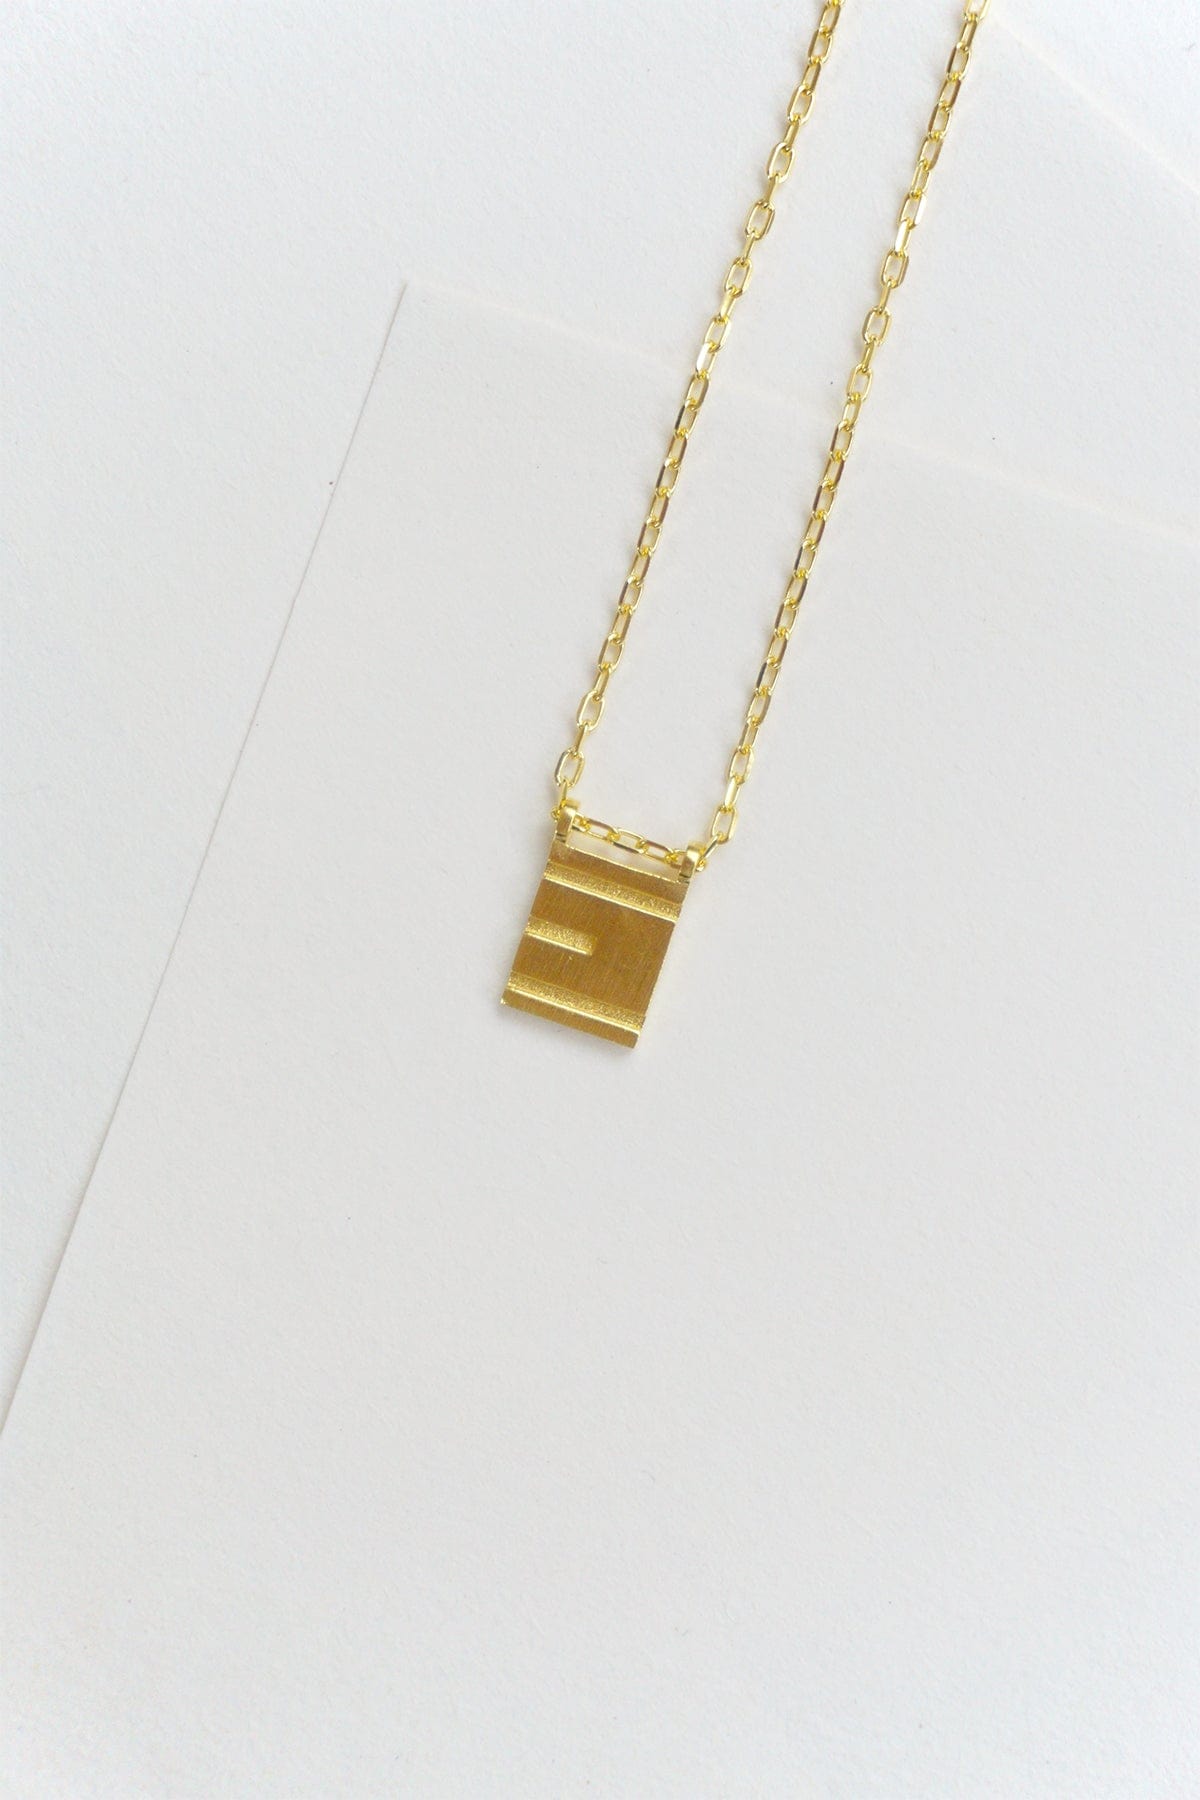 Initial Necklace - Gold Plated Gold / E AR.M ANNA ROSA MOSCHOUTI